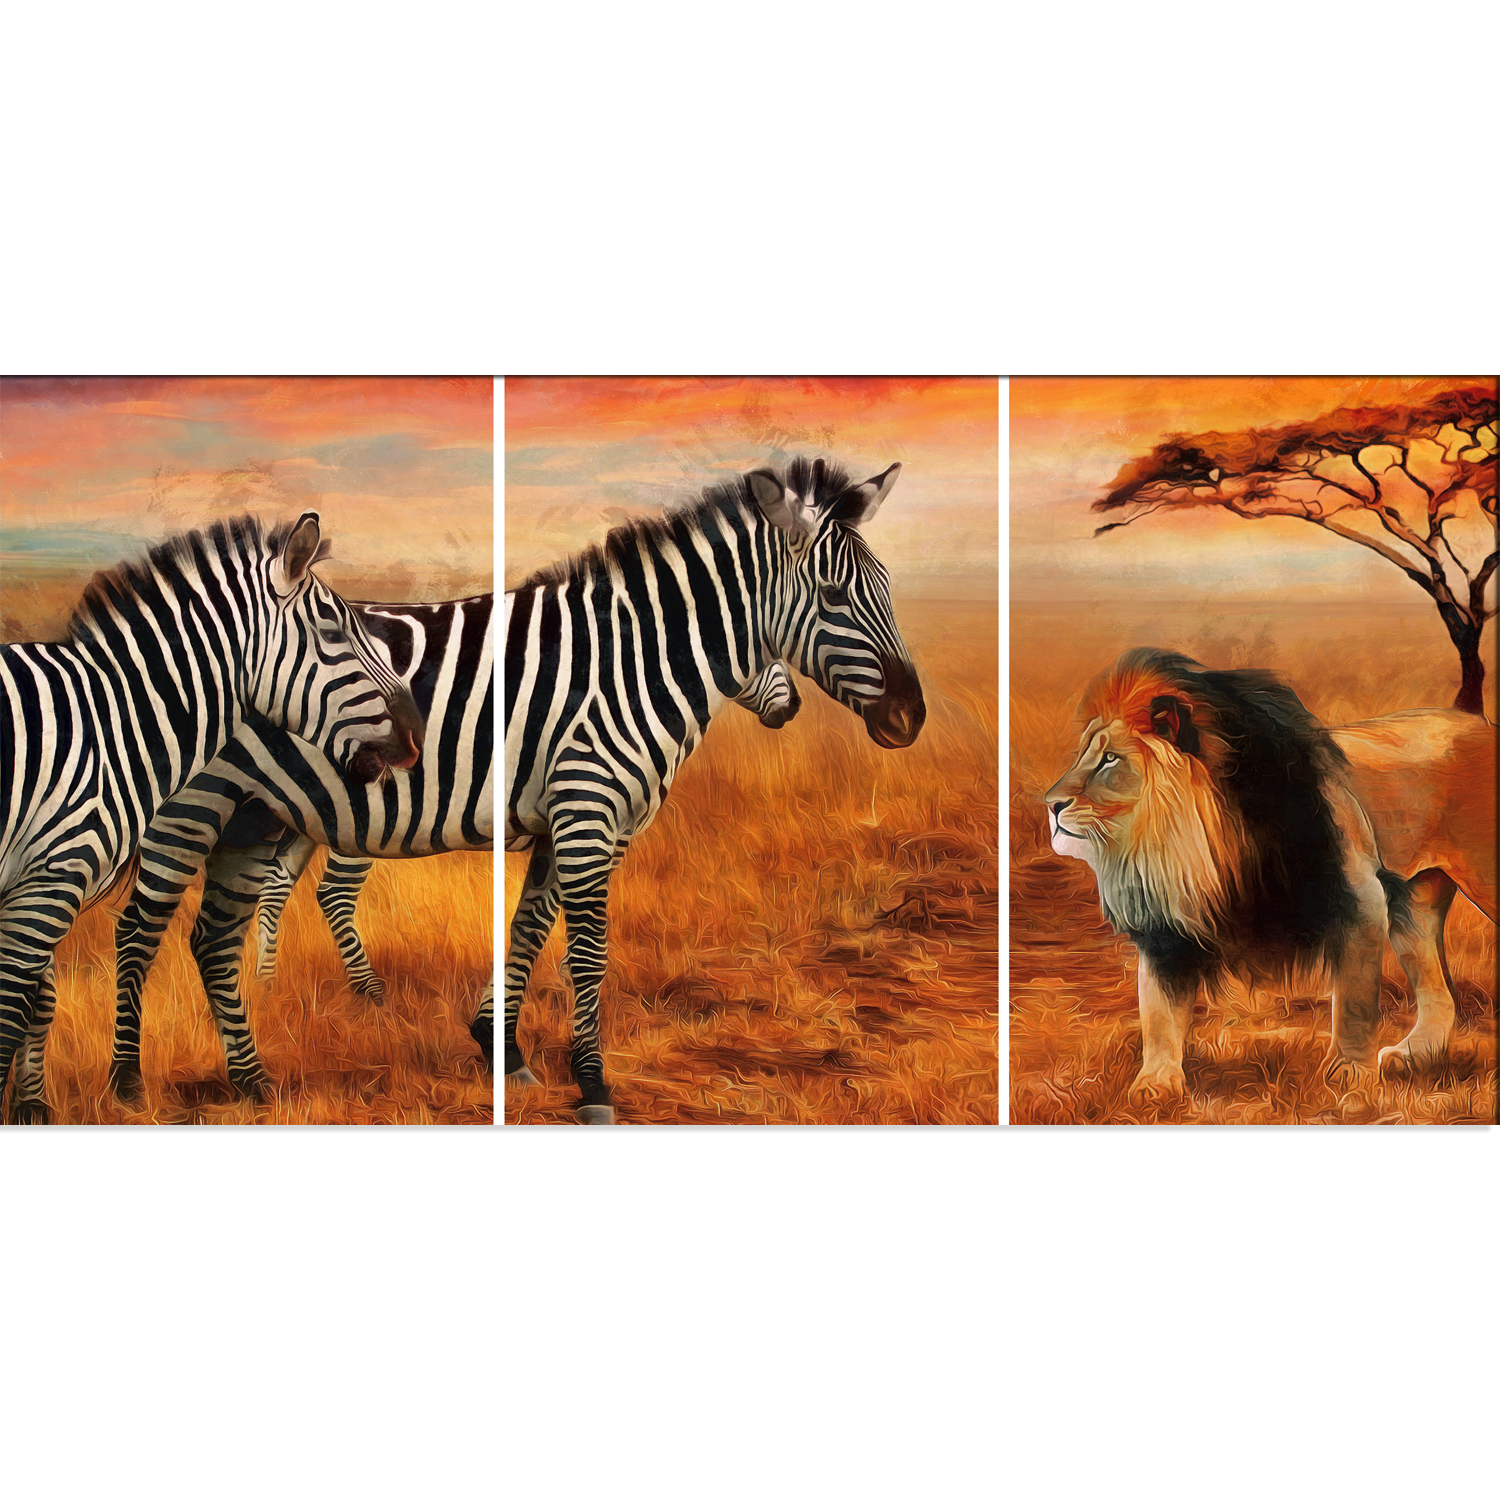 Zebra And Lion Animal Canvas Wall Painting